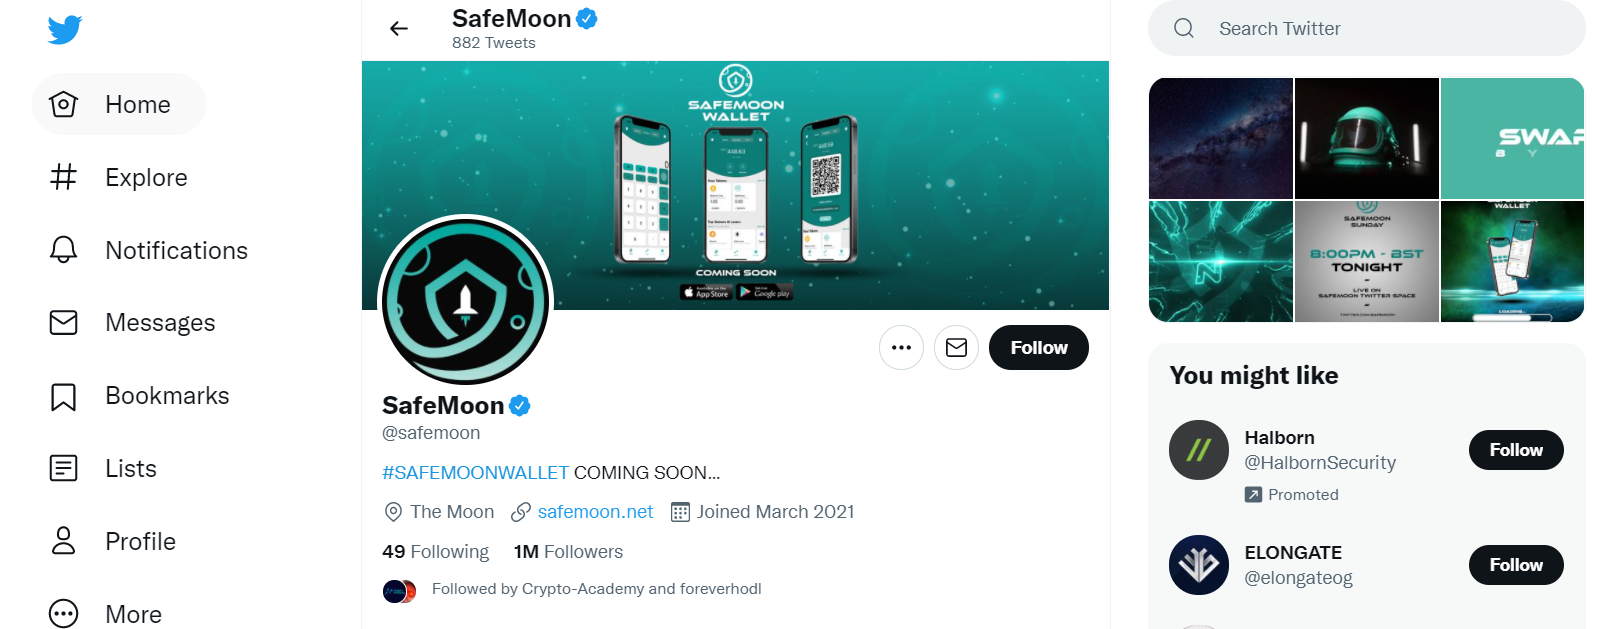 SafeMoon Reddit & Twitter - Here's Where you Can Follow SafeMoon on Social Media